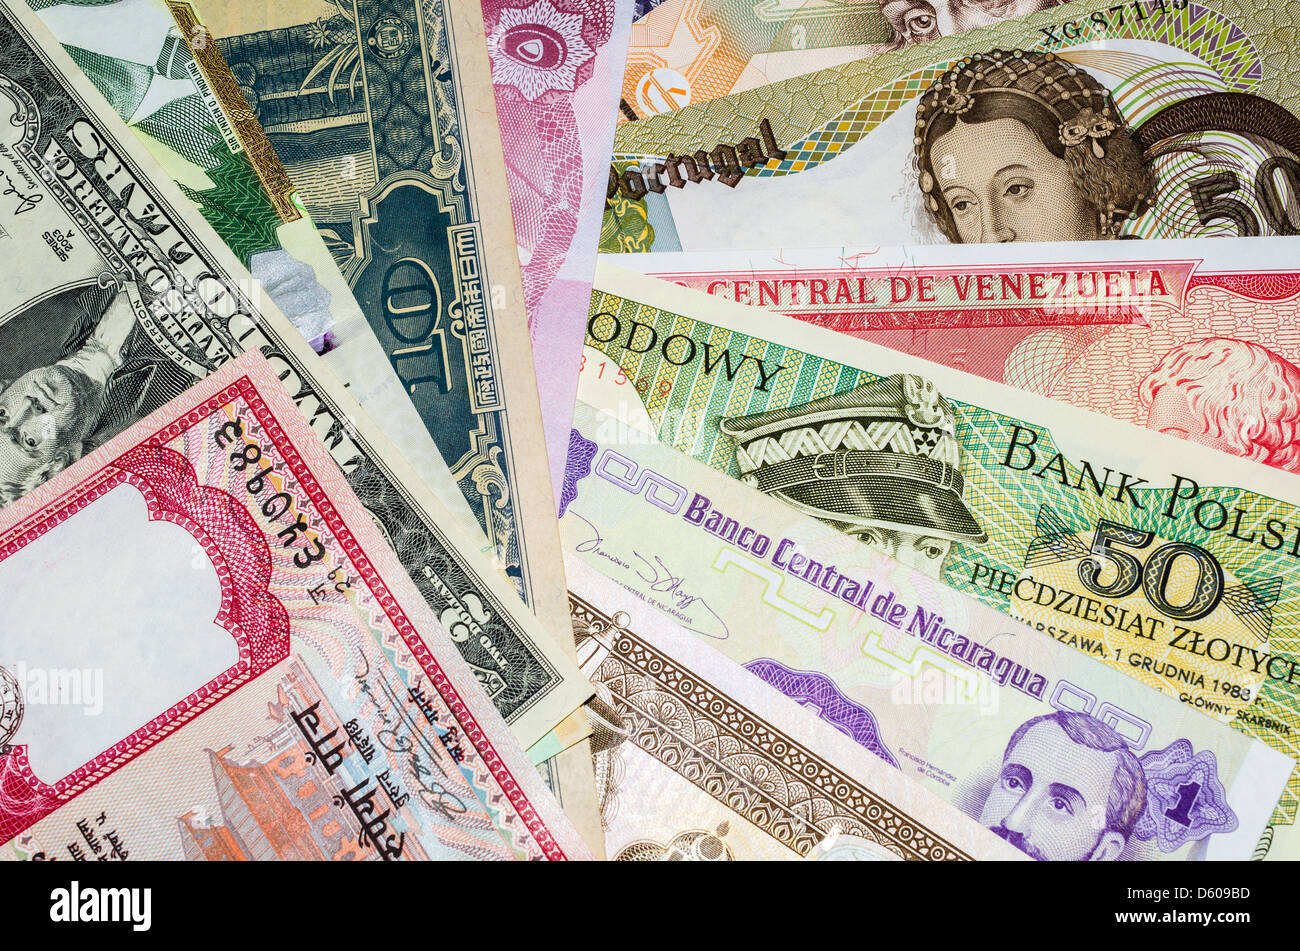 International currency with banknotes from different world countries. Stock Photo